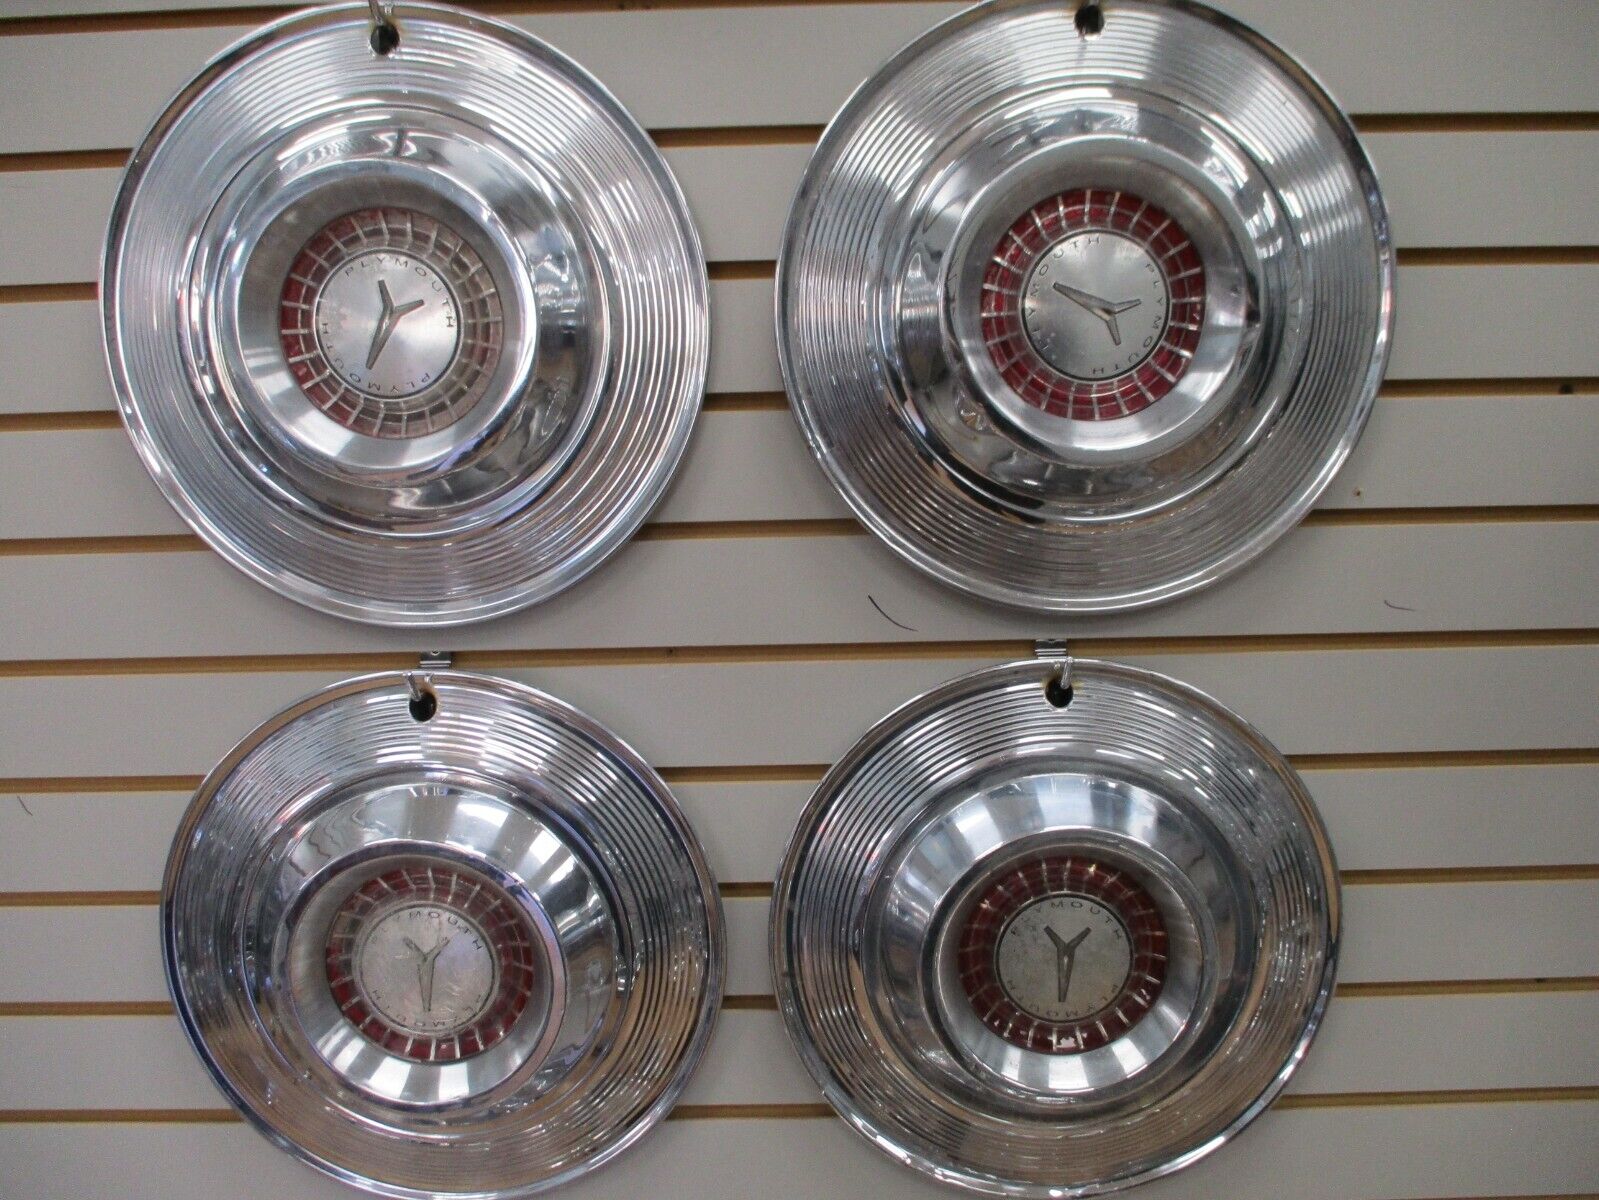 1964 PLYMOUTH BELVIDERE FURY Wheel Cover Hubcaps SET 64